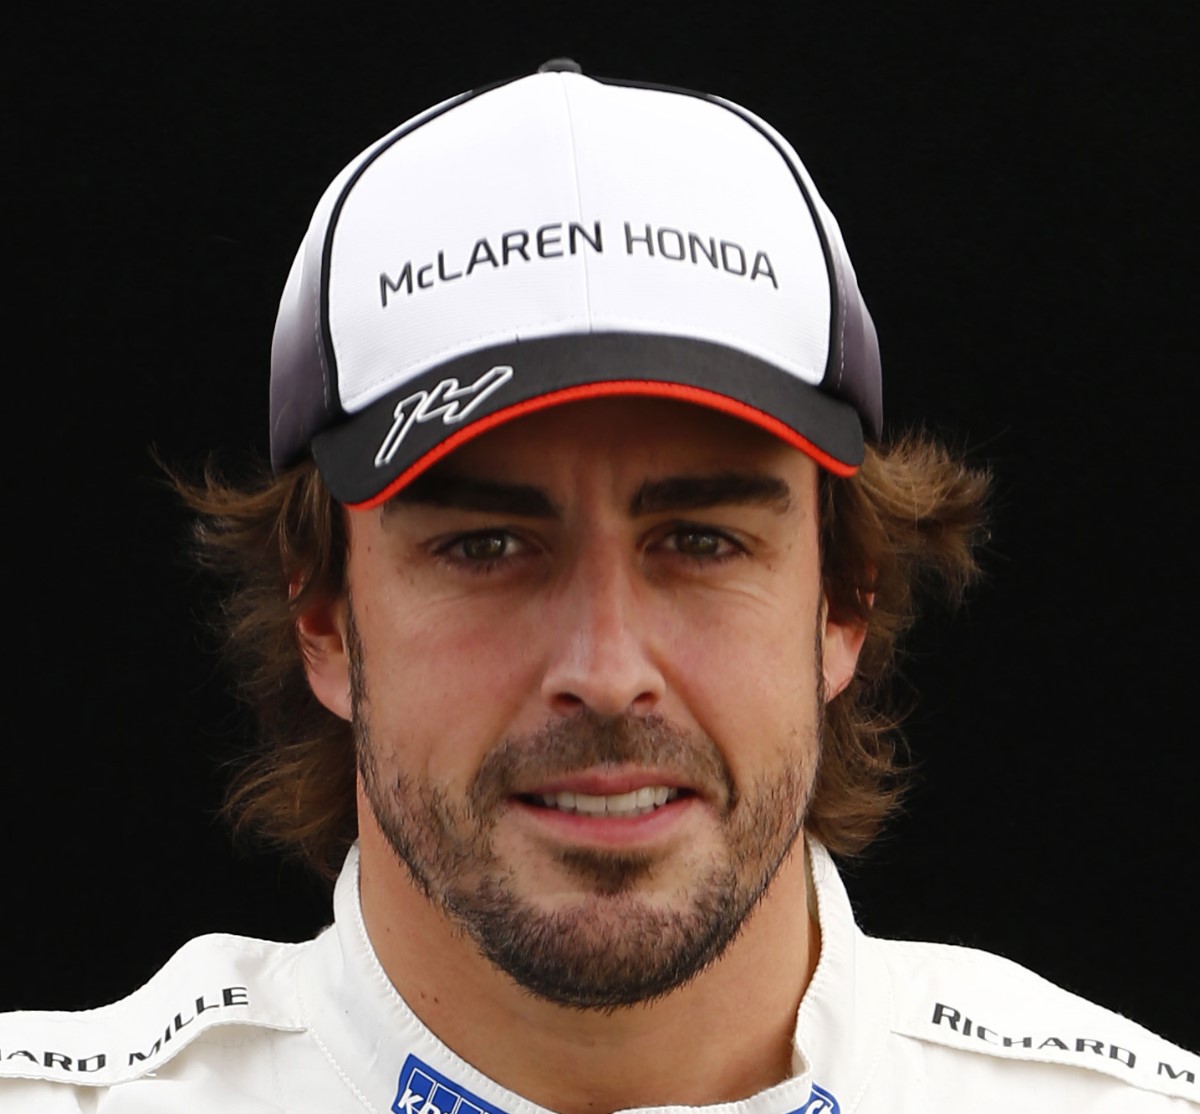 ALonso will not retire unless rookie Vandoorne beats him this year